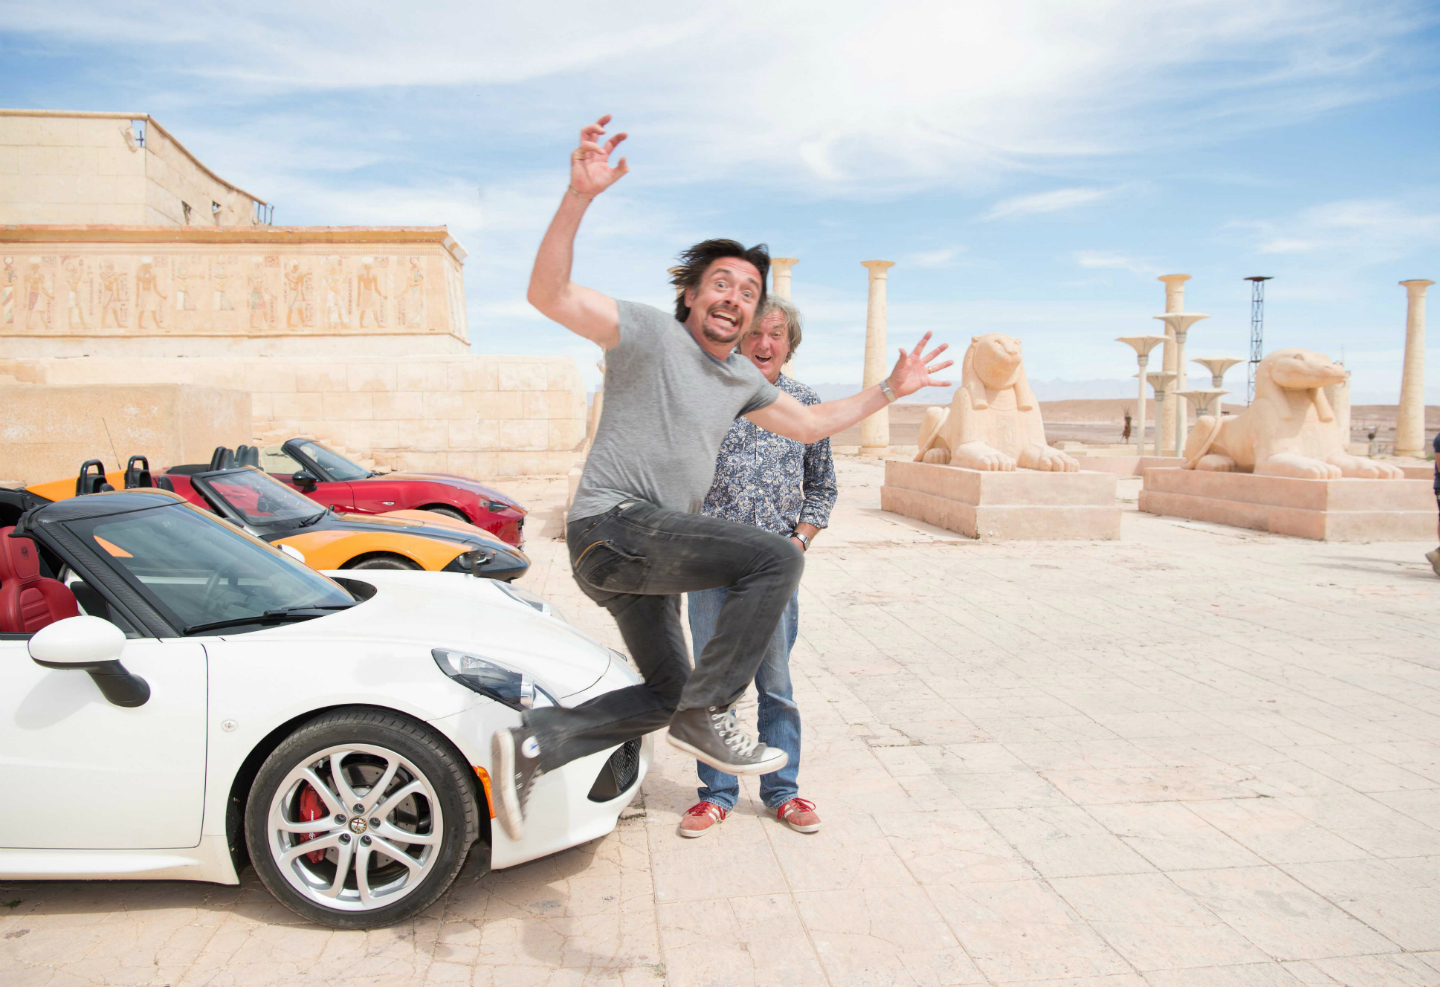 Video preview: The Grand Tour is coming. What could possibly go wrong?